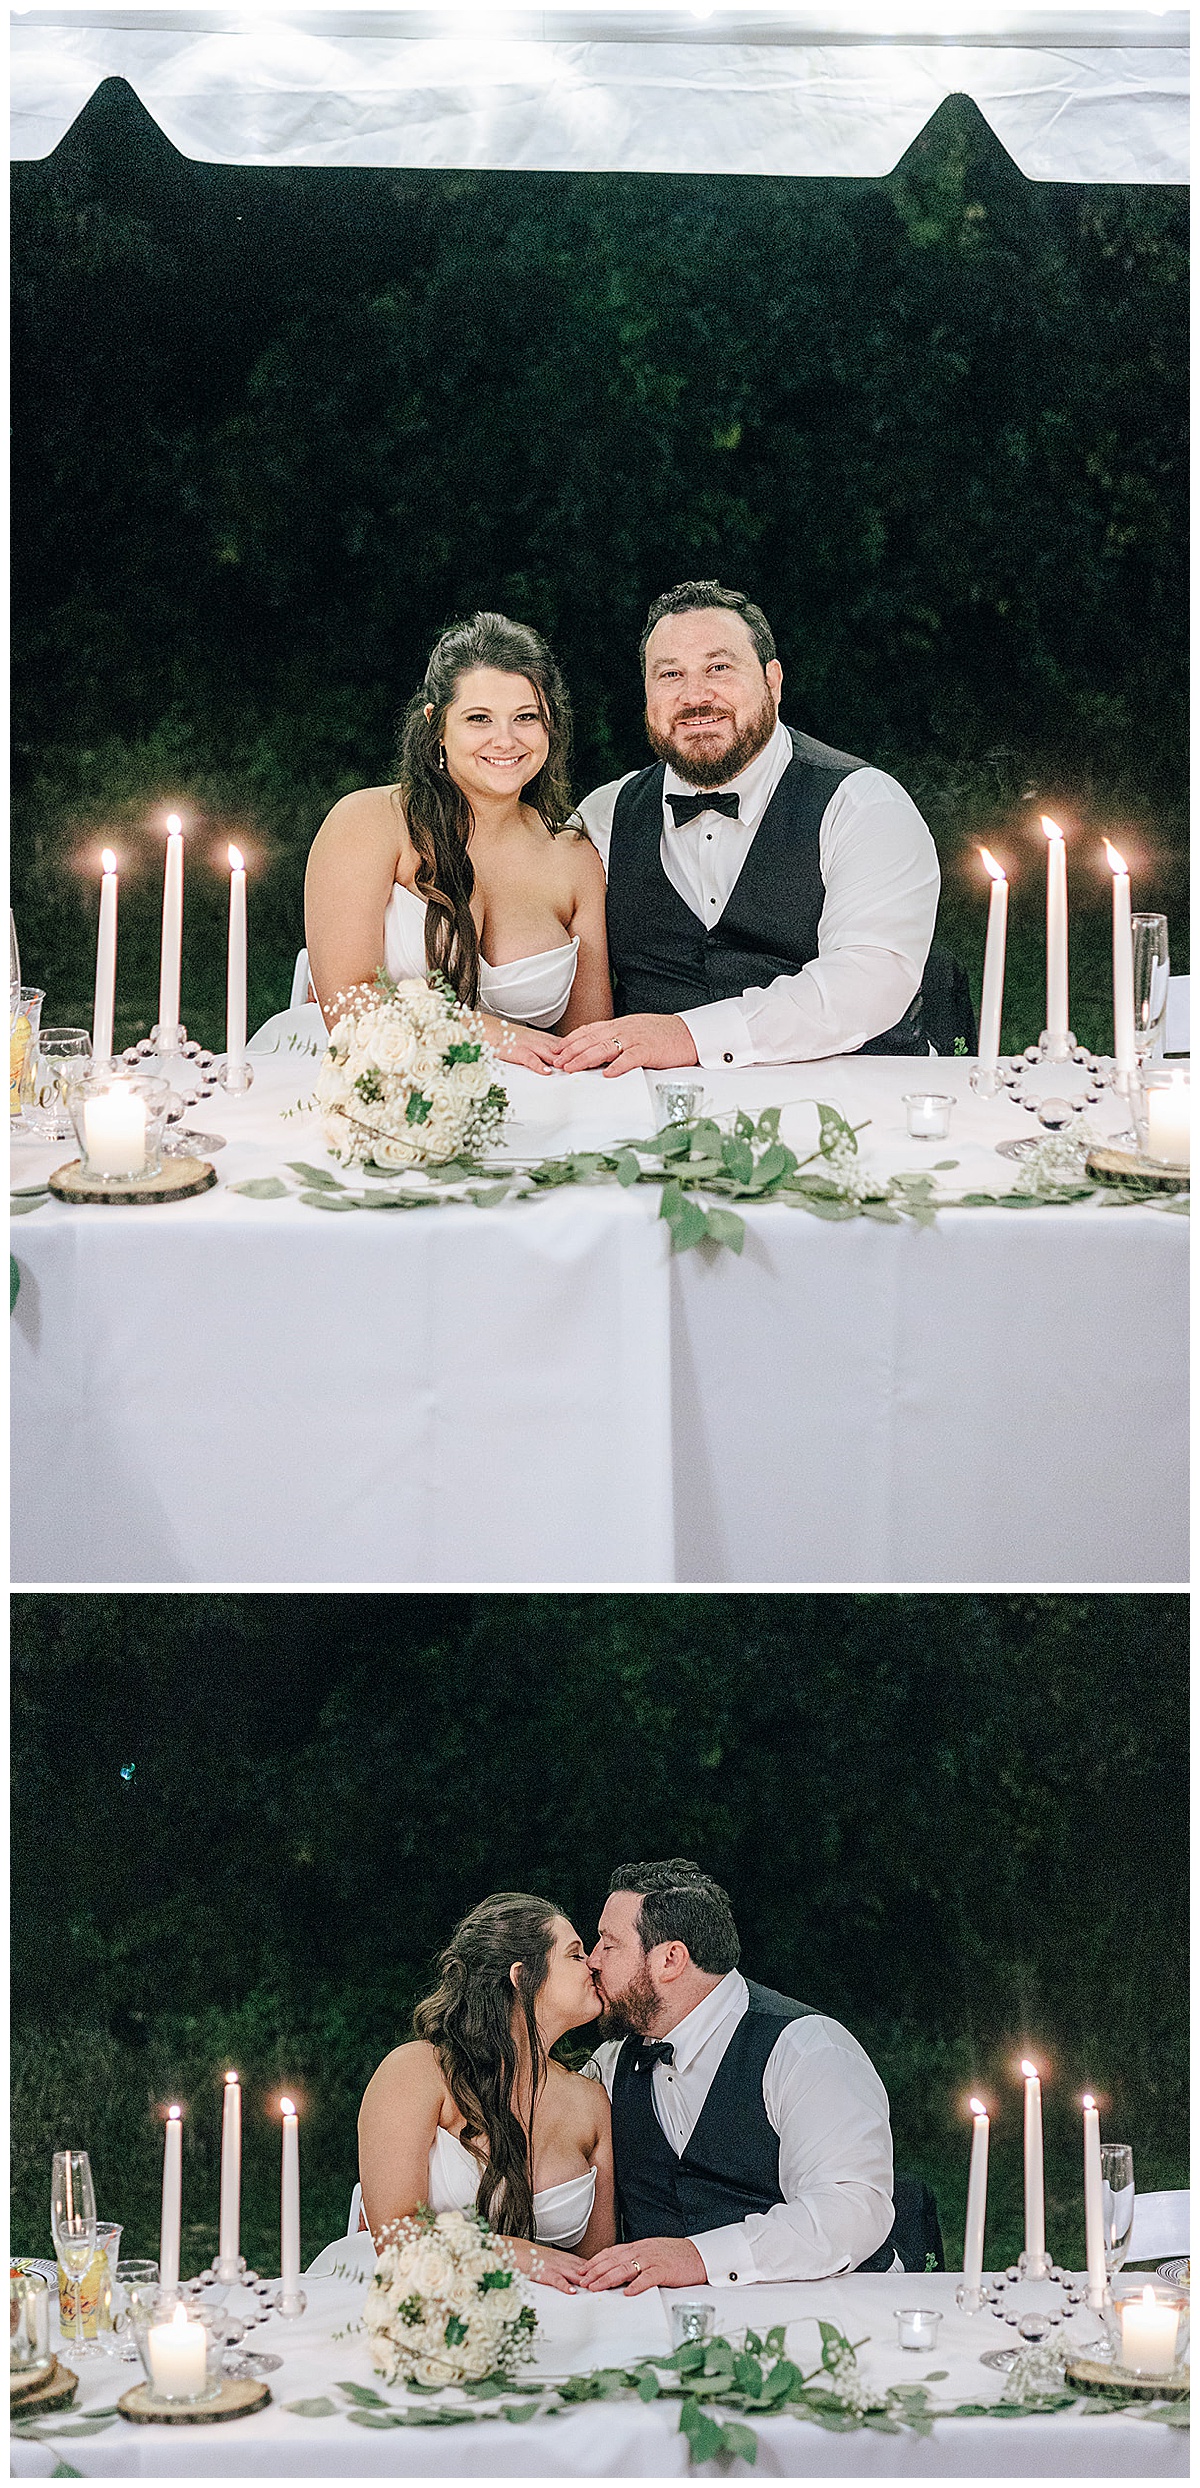 Husband and wife sit together for intimate backyard wedding